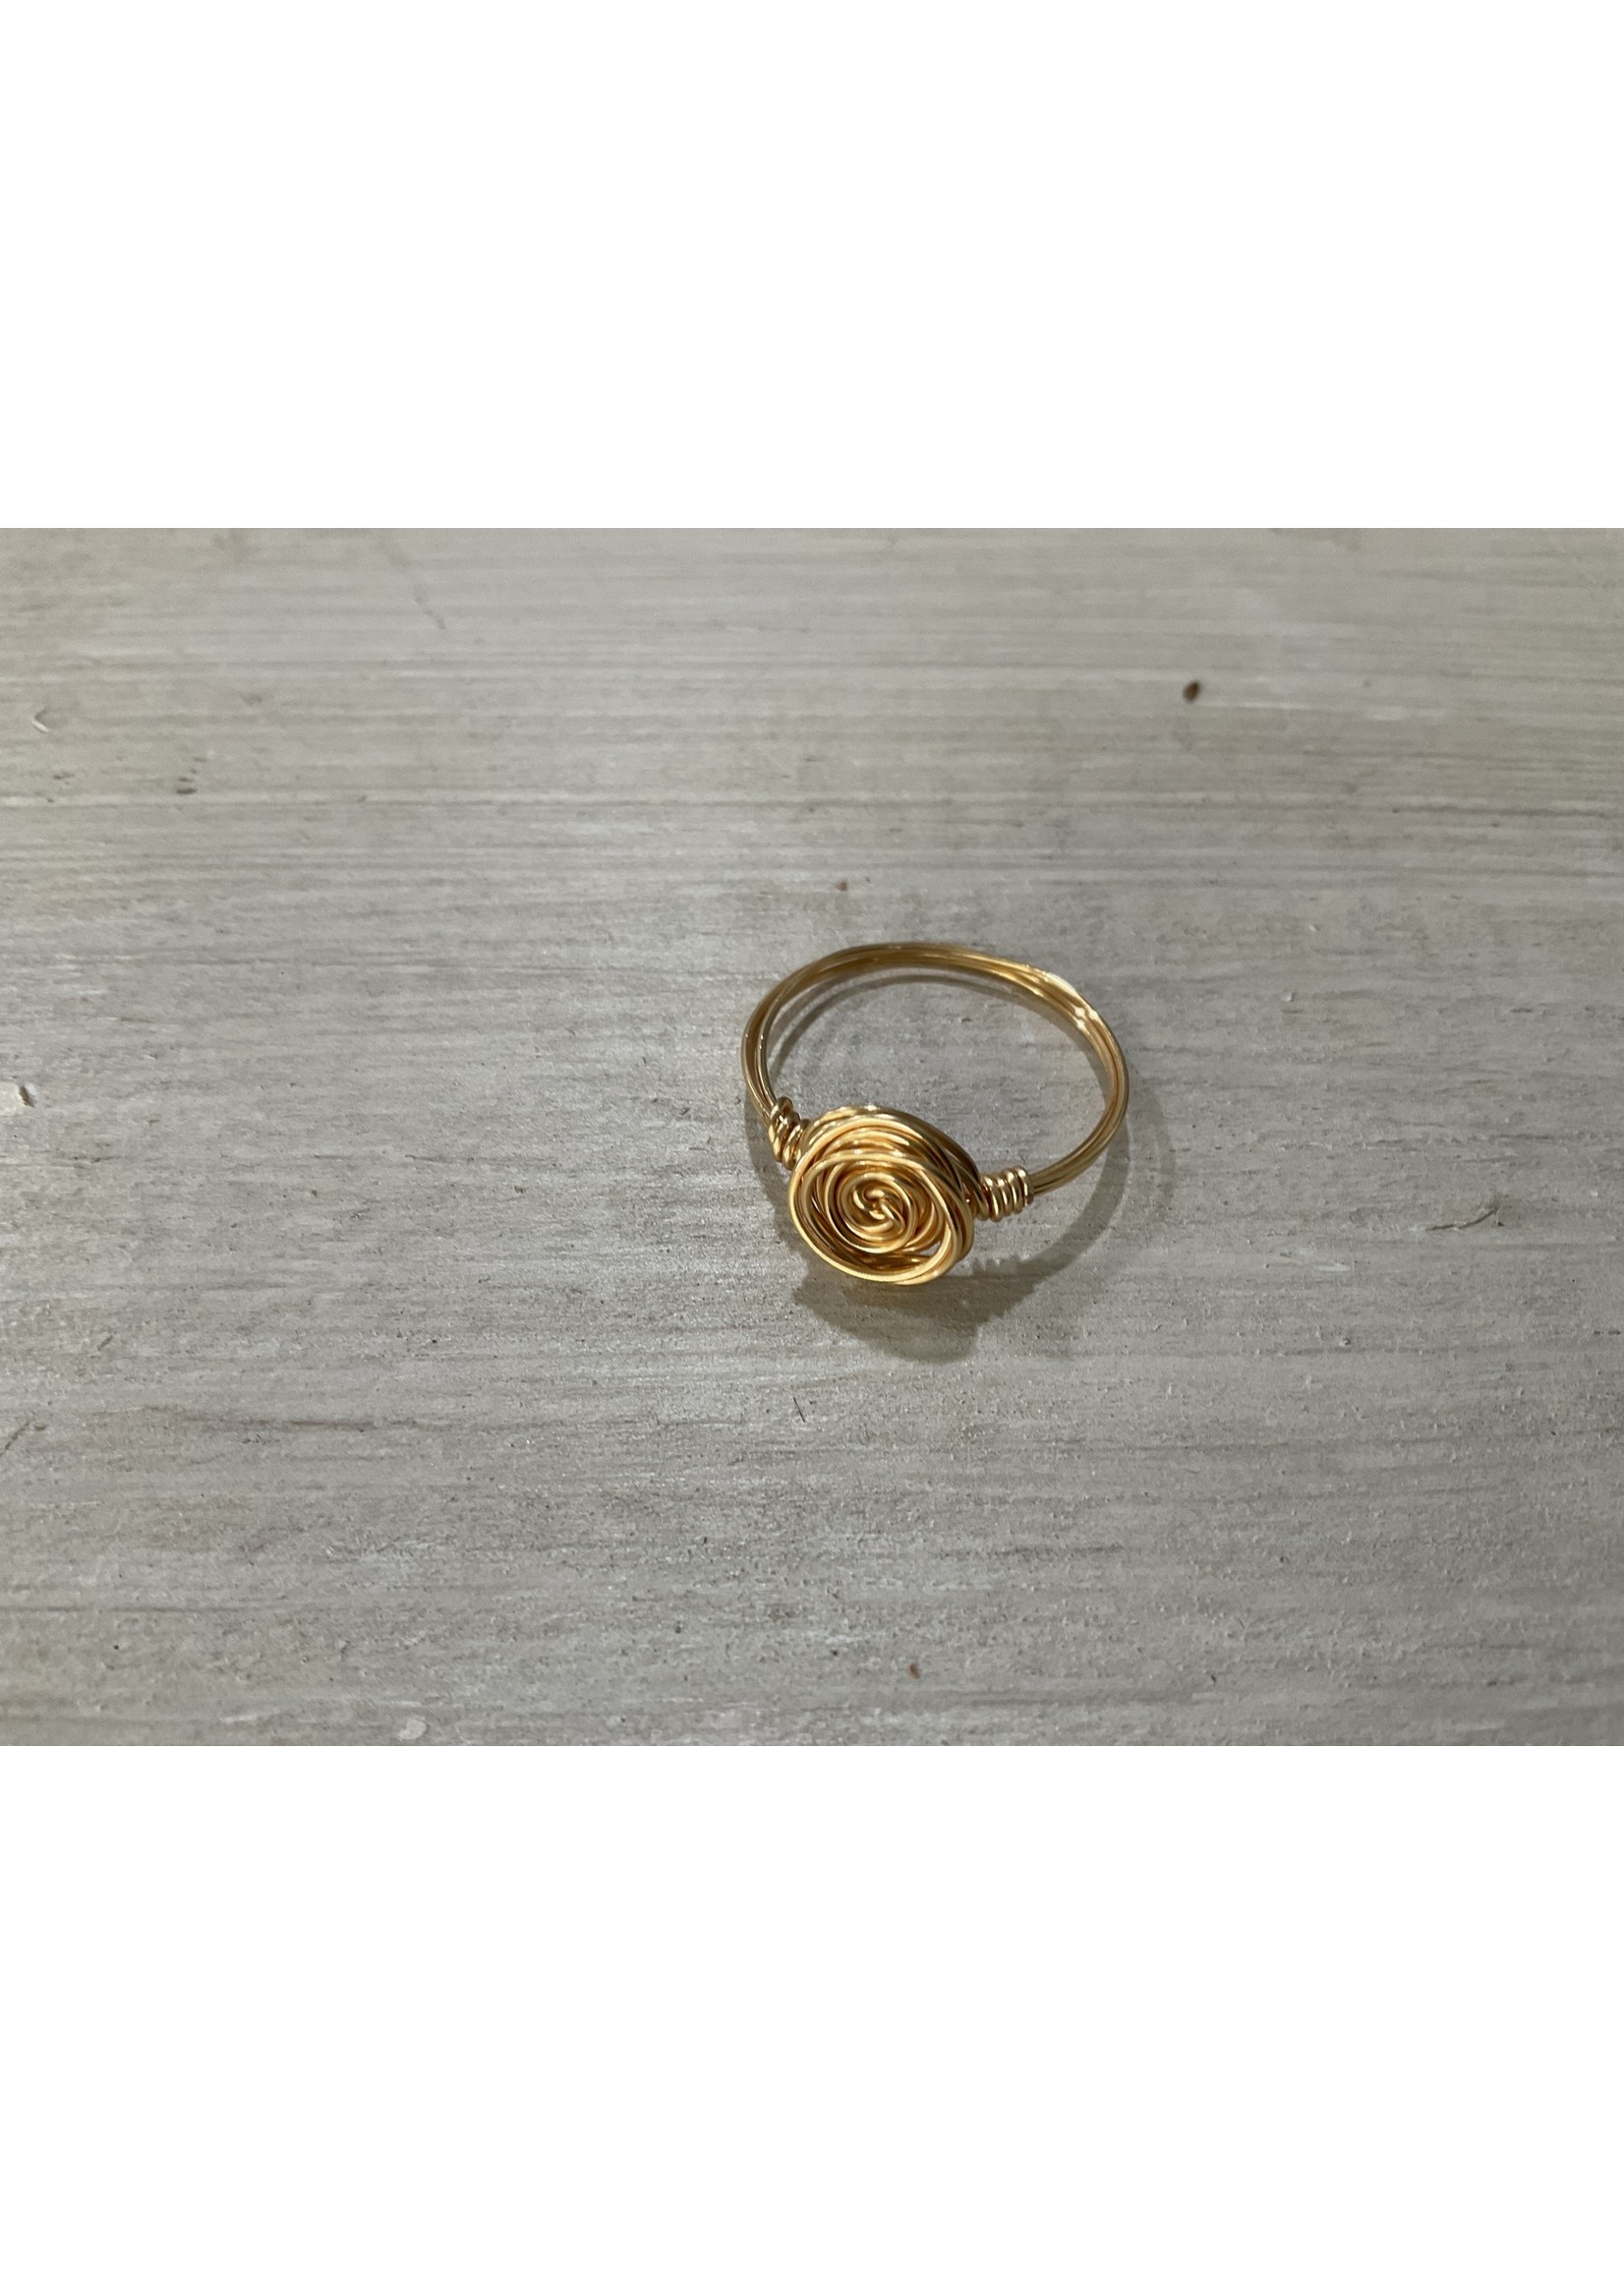 Our Twisted Dahlia B17 Hand Crafted Metal Rings Gold Tone 11